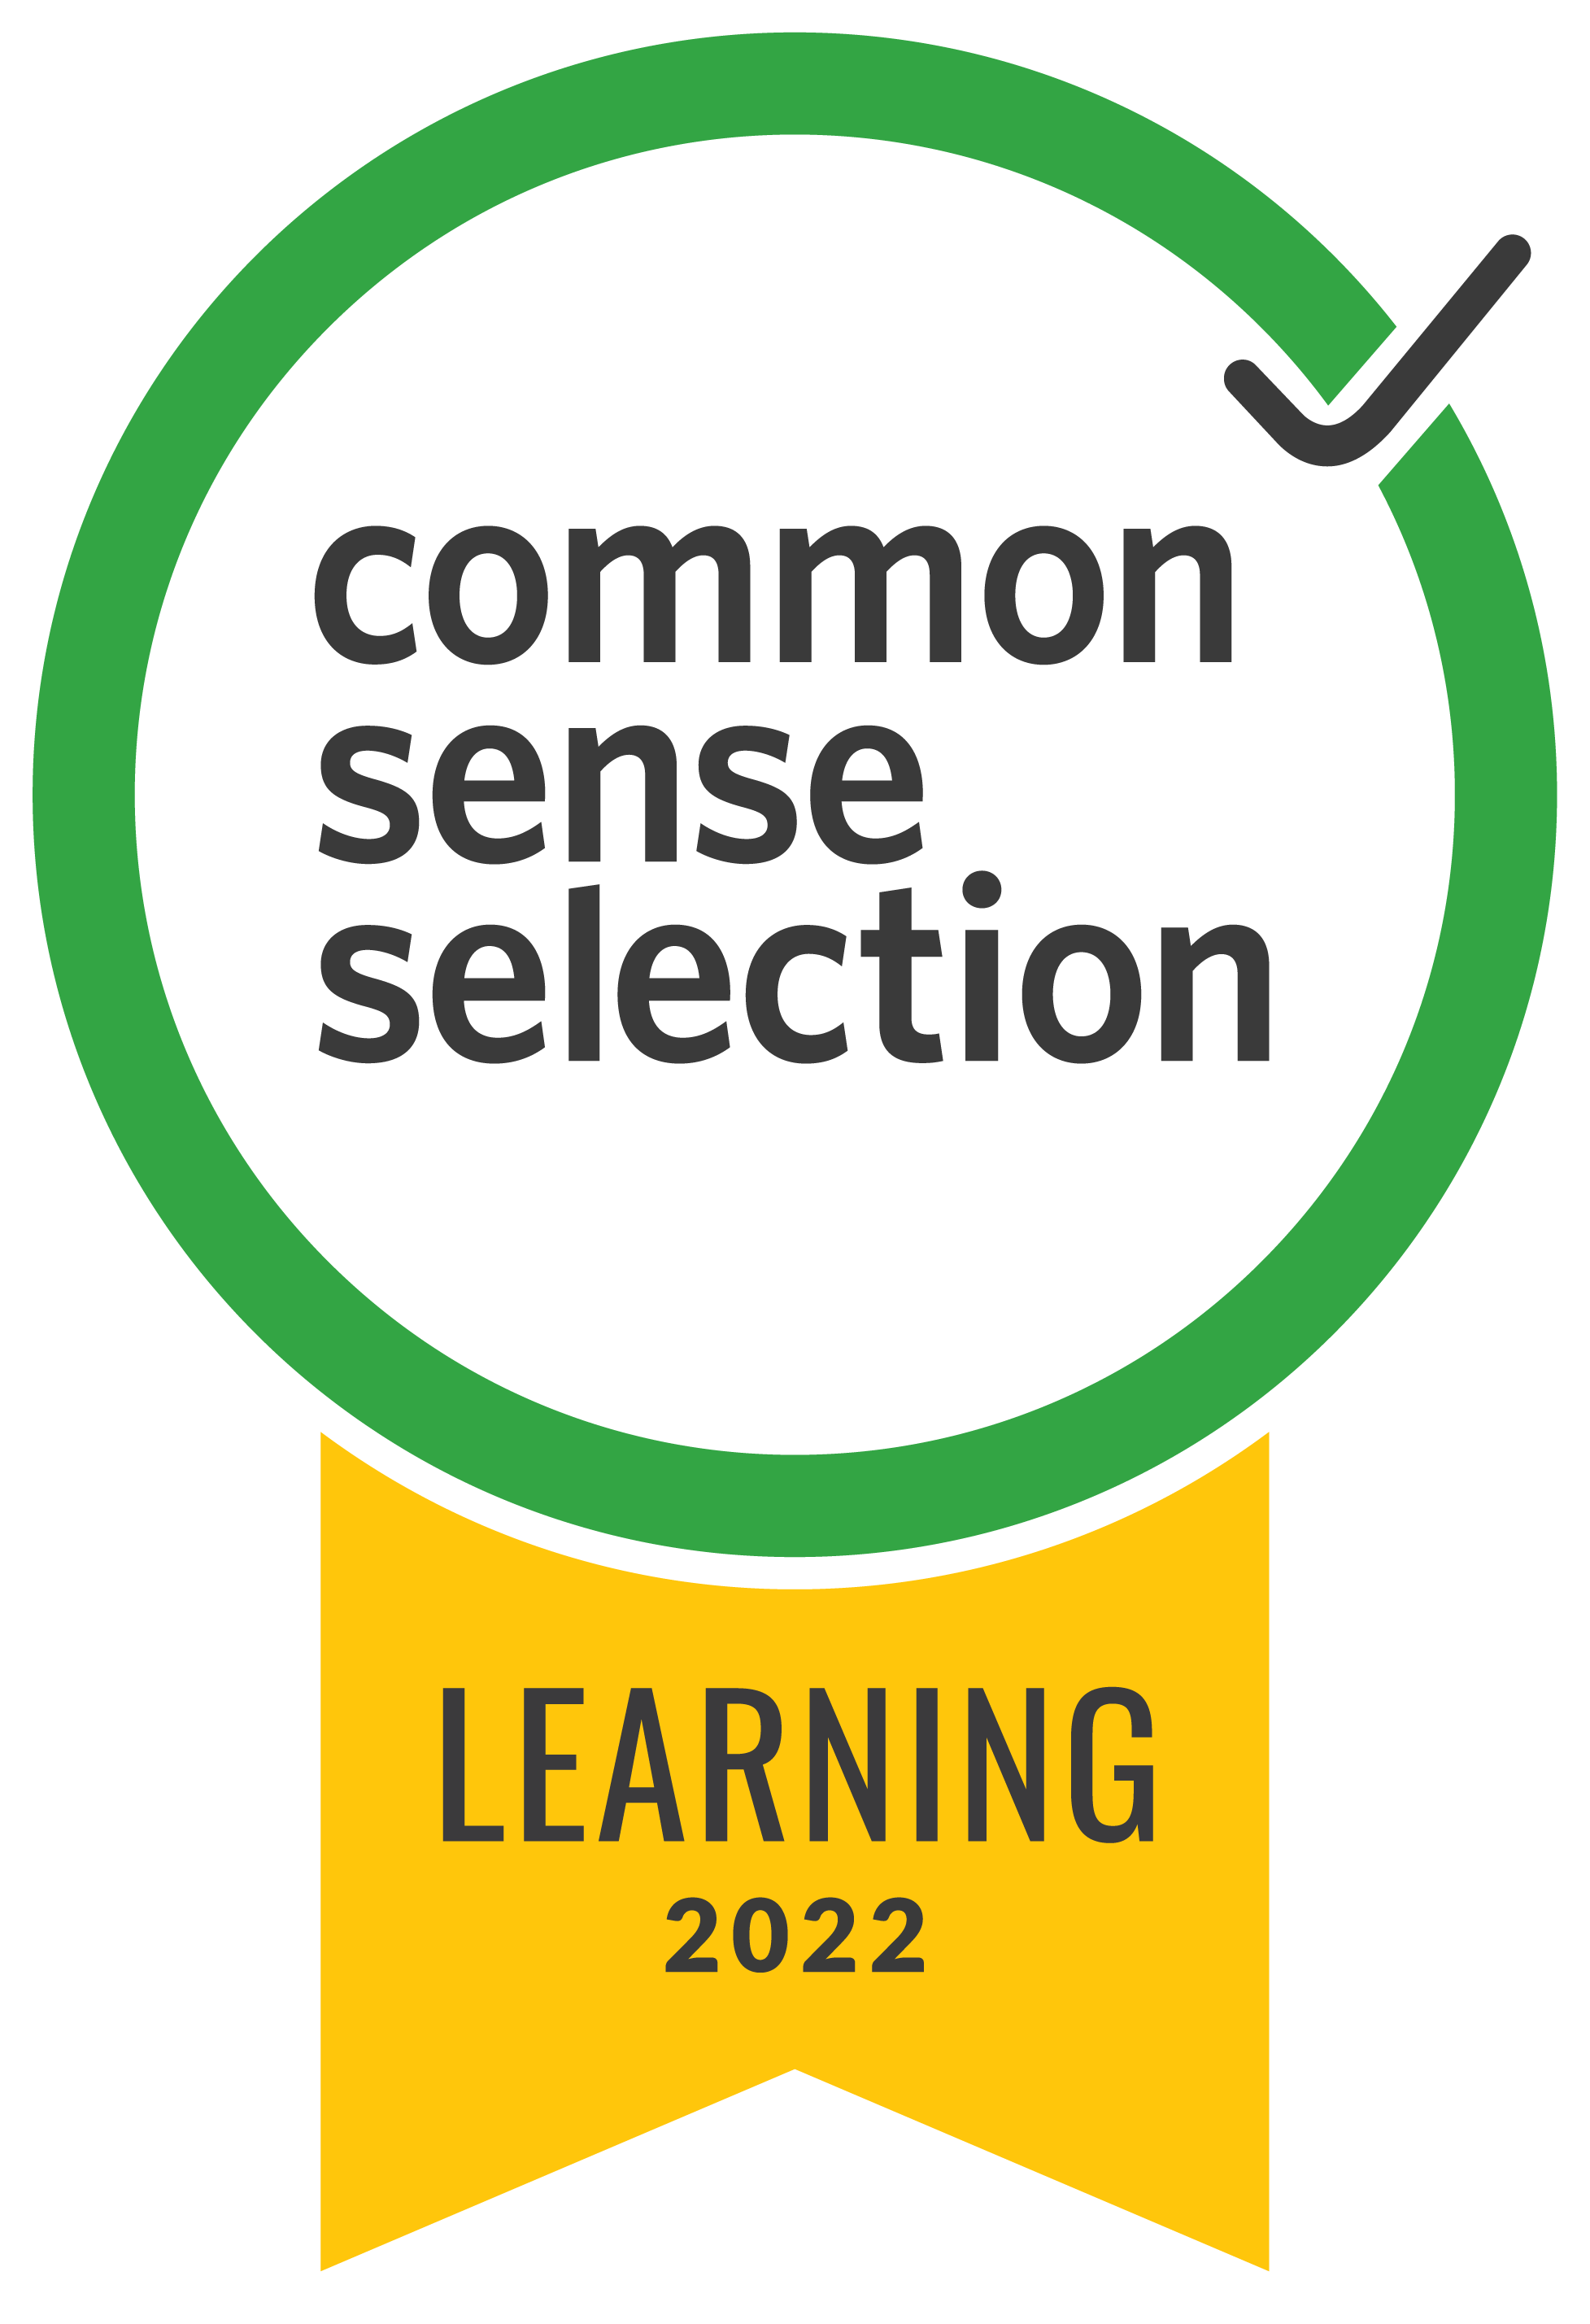 CommonSenseSelection_seal_RGB_Learning2022_2x (1)